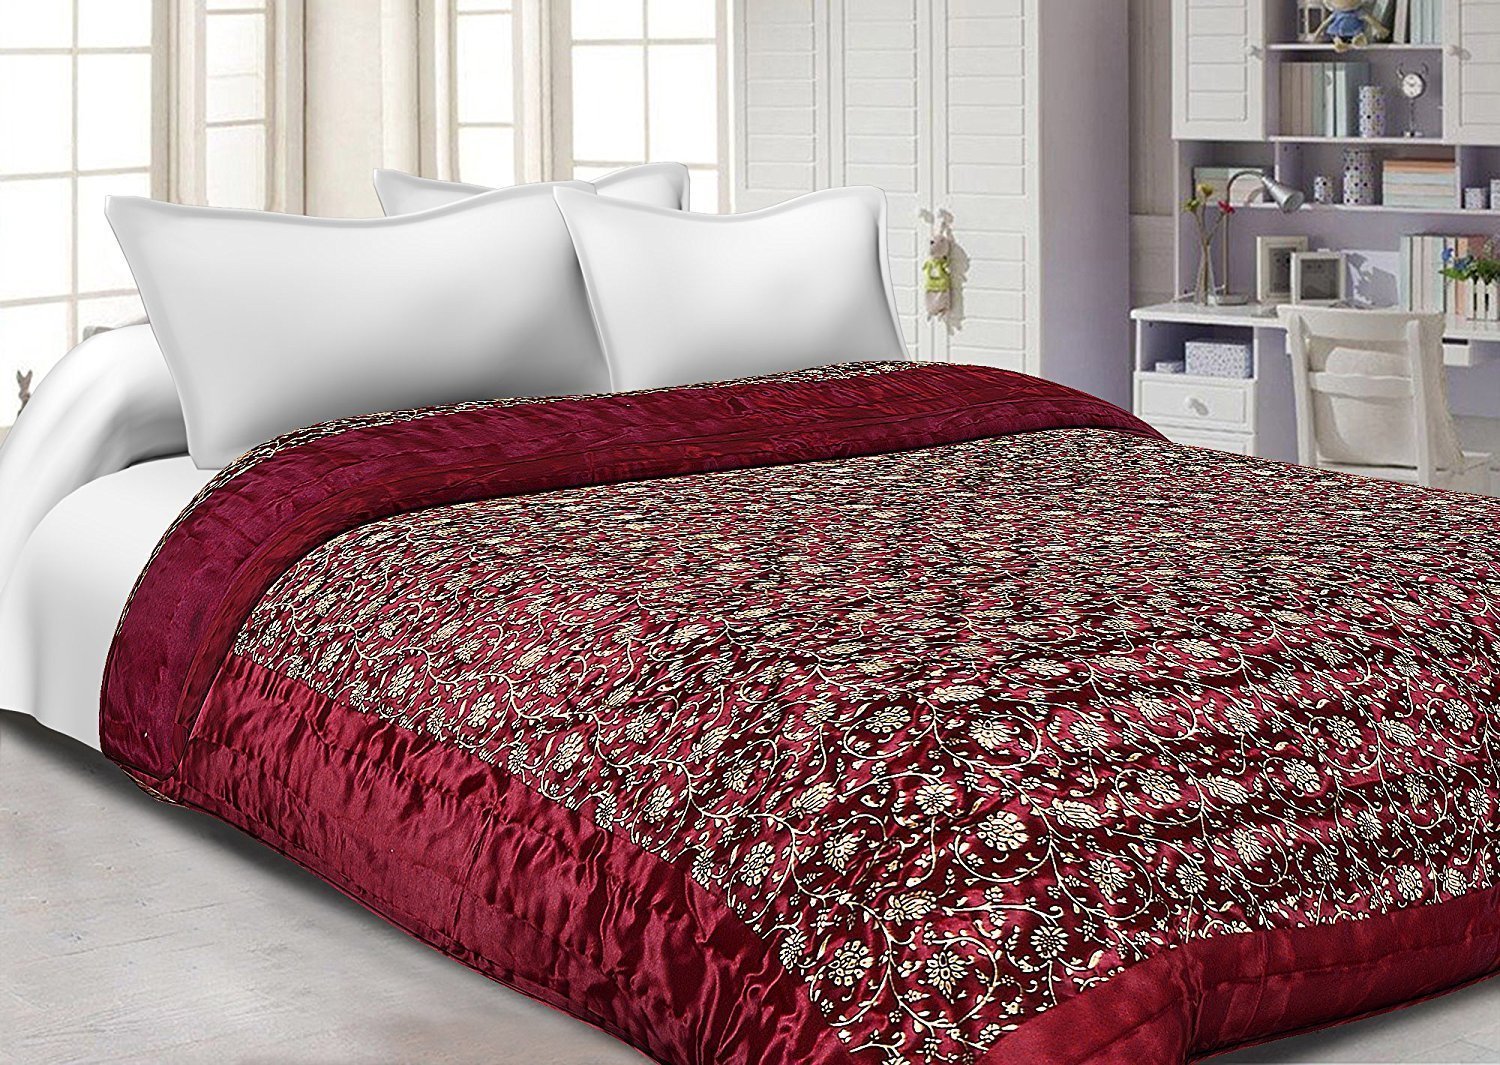 Luxurious Quilt, Cozy Pillows and - Soma Blockprints